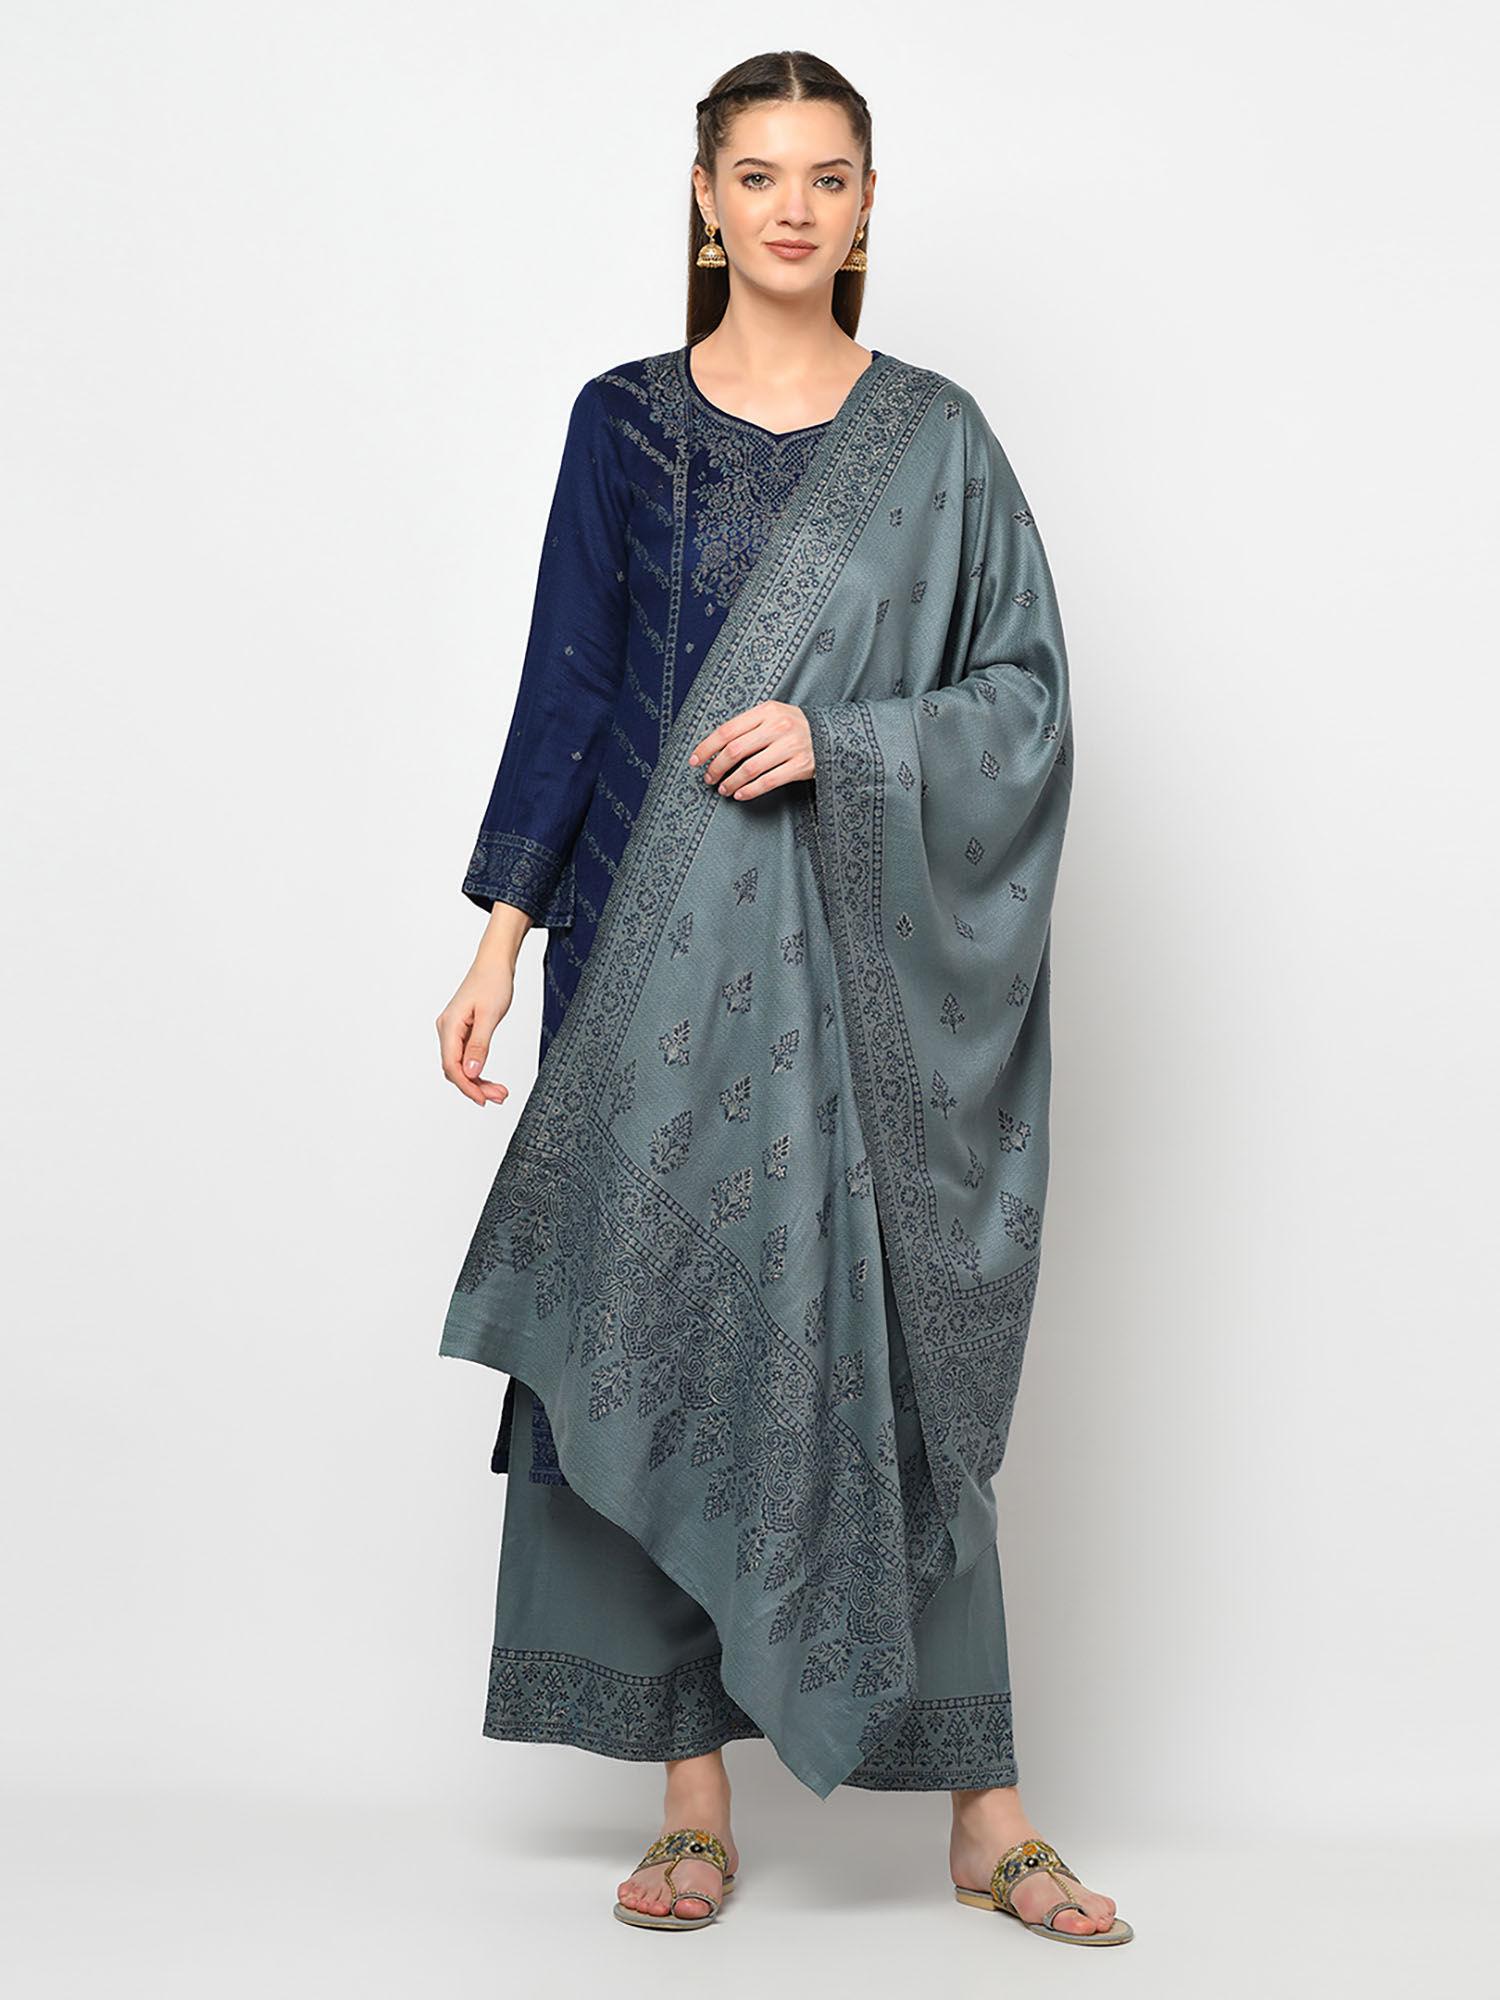 women-winter-acro-wool-woven-suit-with-stole-unstitched-dress-material-(set-of-2)